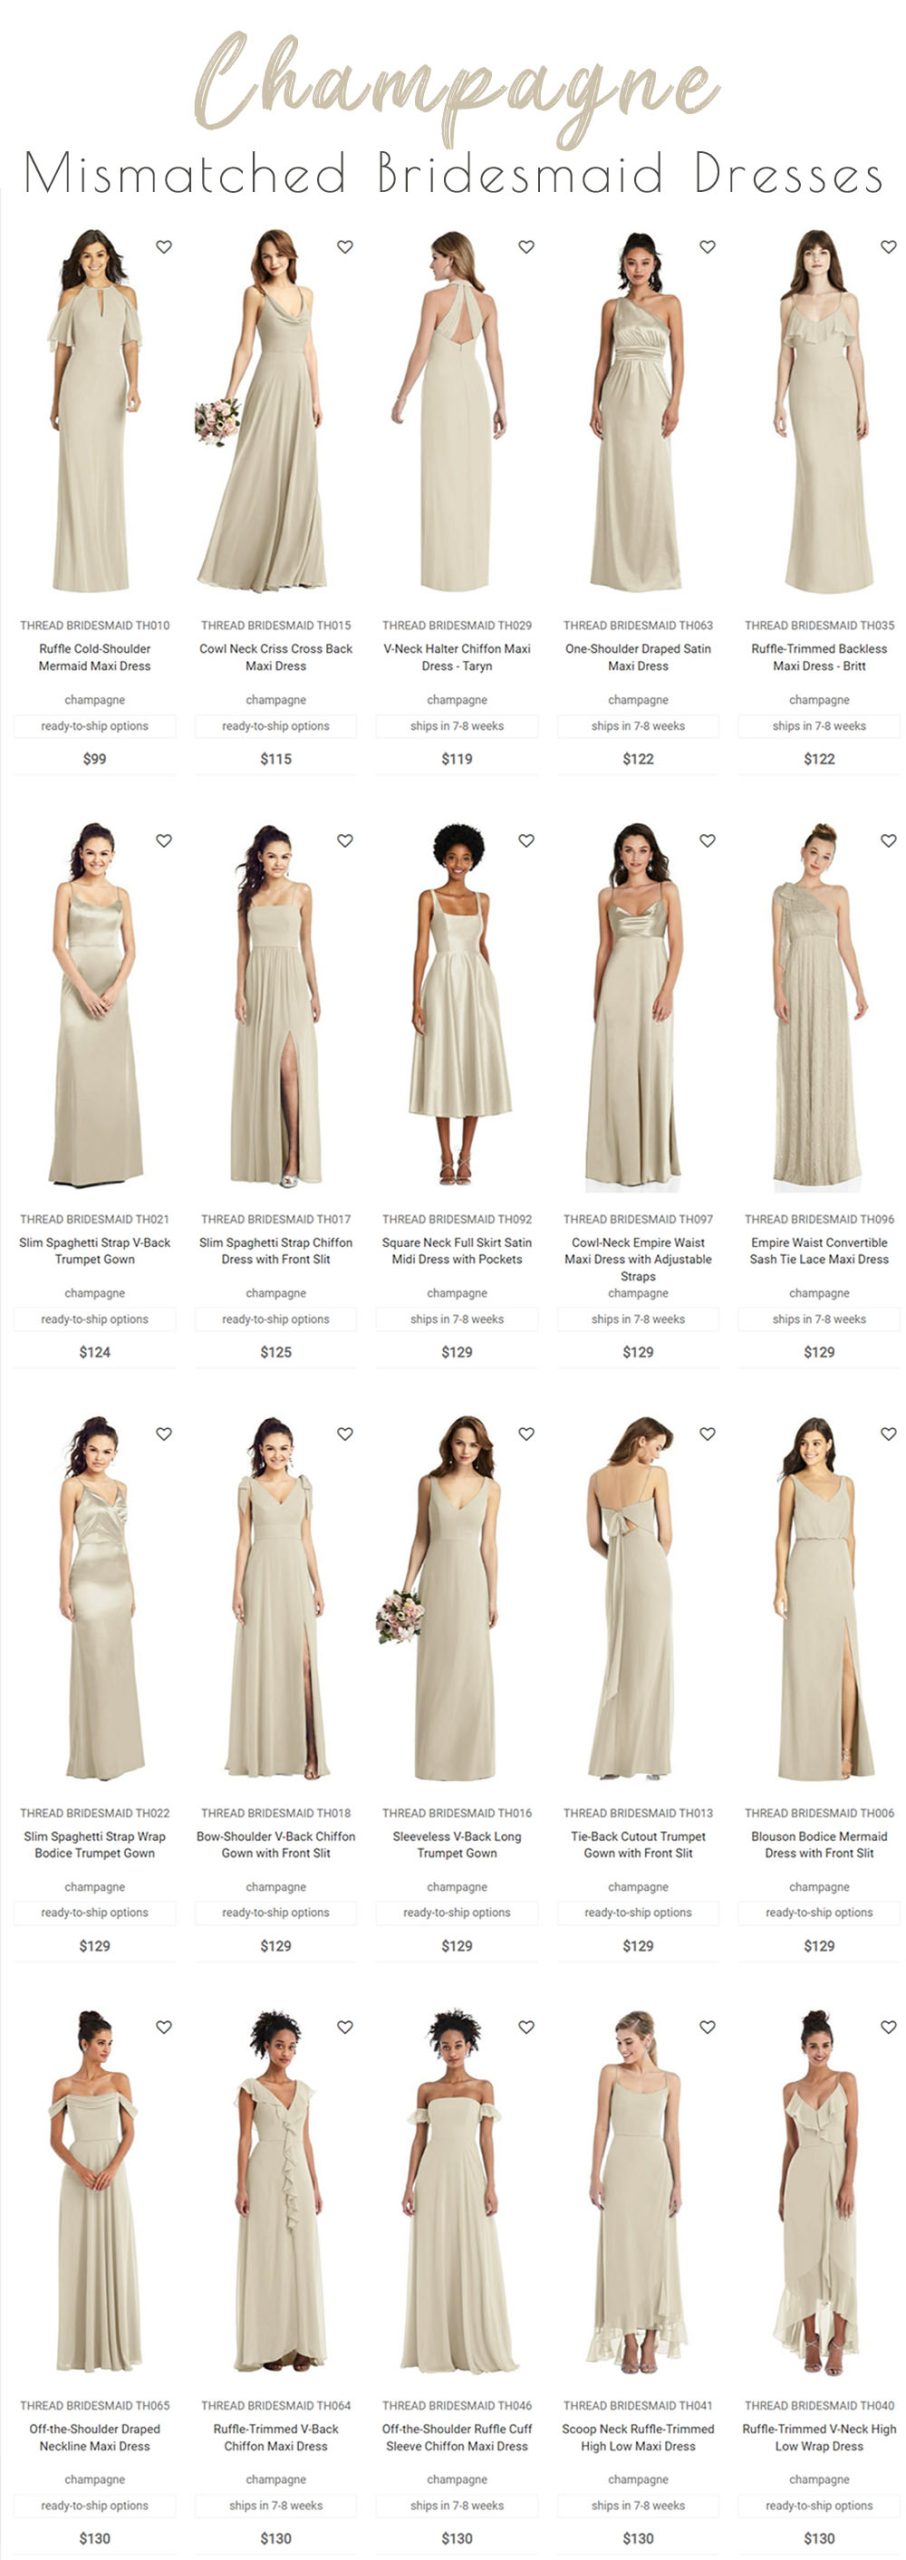 Champagne Mismatched Bridesmaid Dresses The Dessy Group